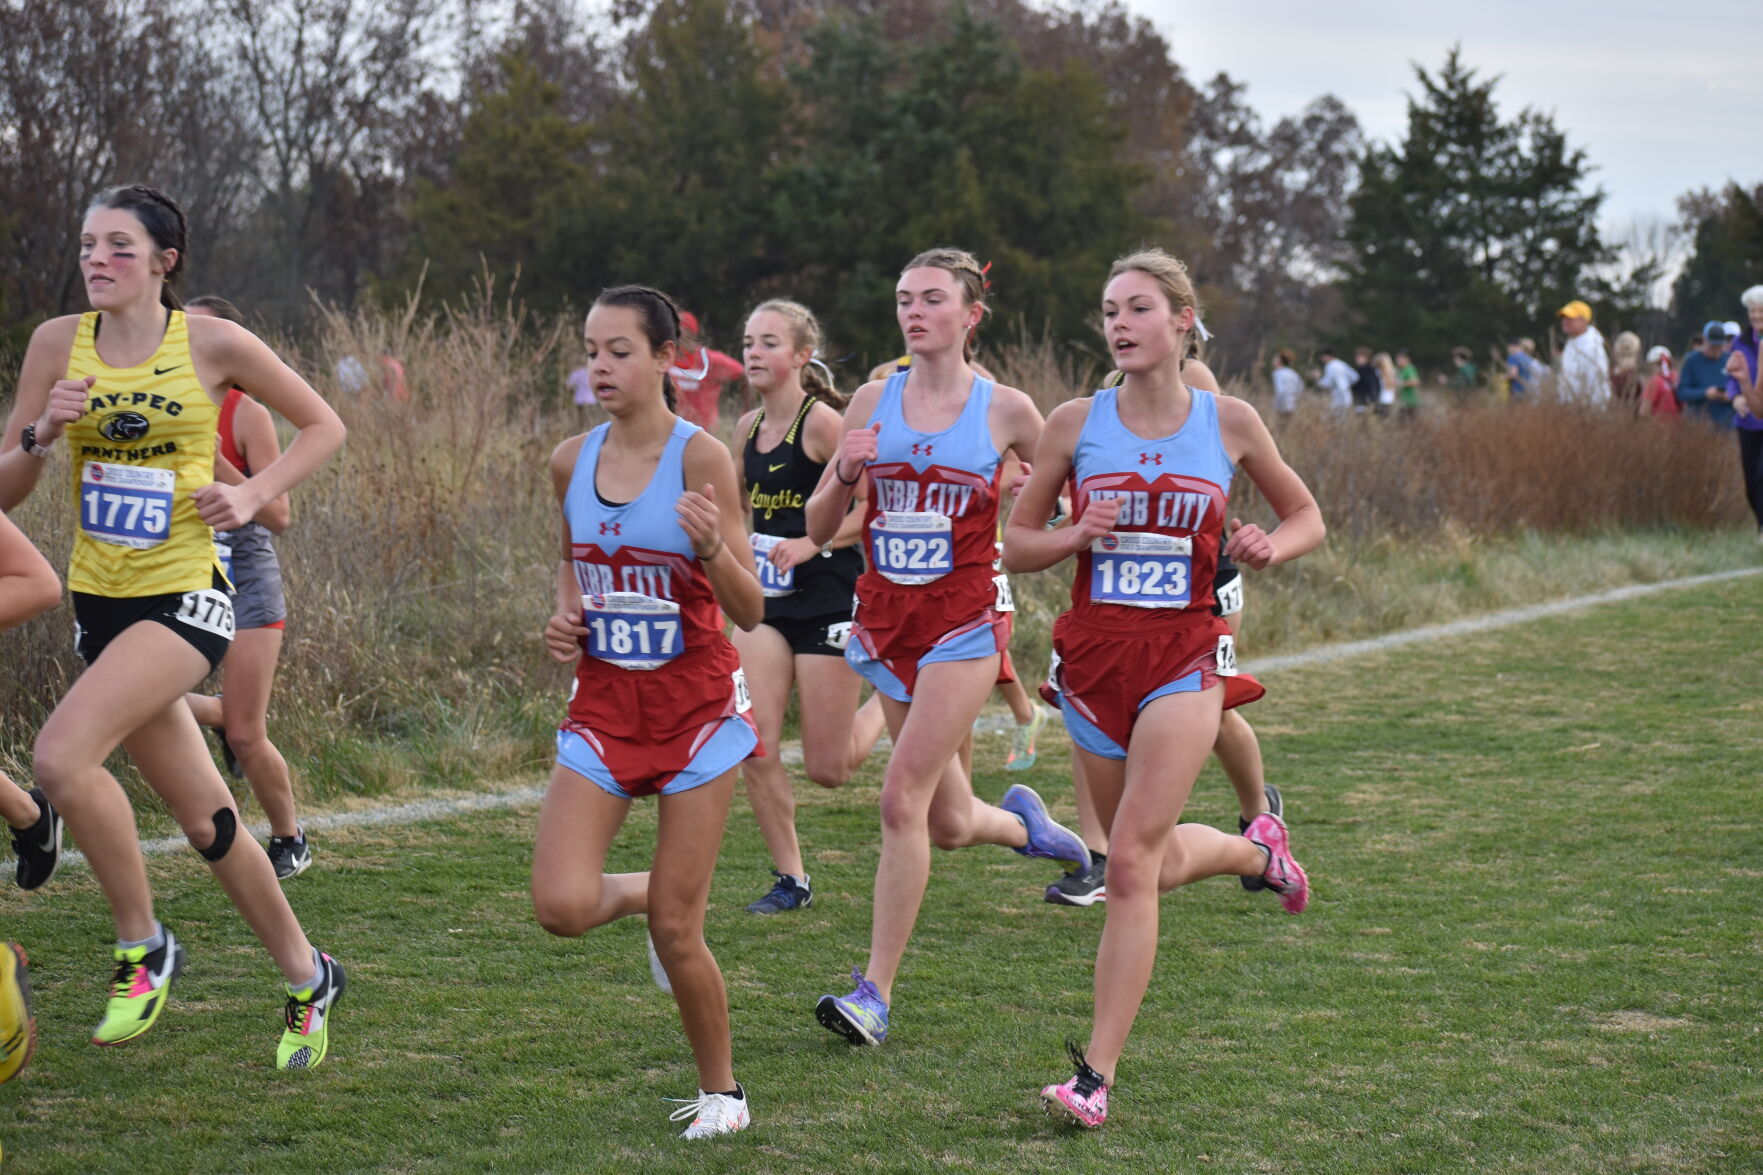 Joplin’s Chance Tindall Sets Career-Best Time at MSHSAA Cross Country Championships